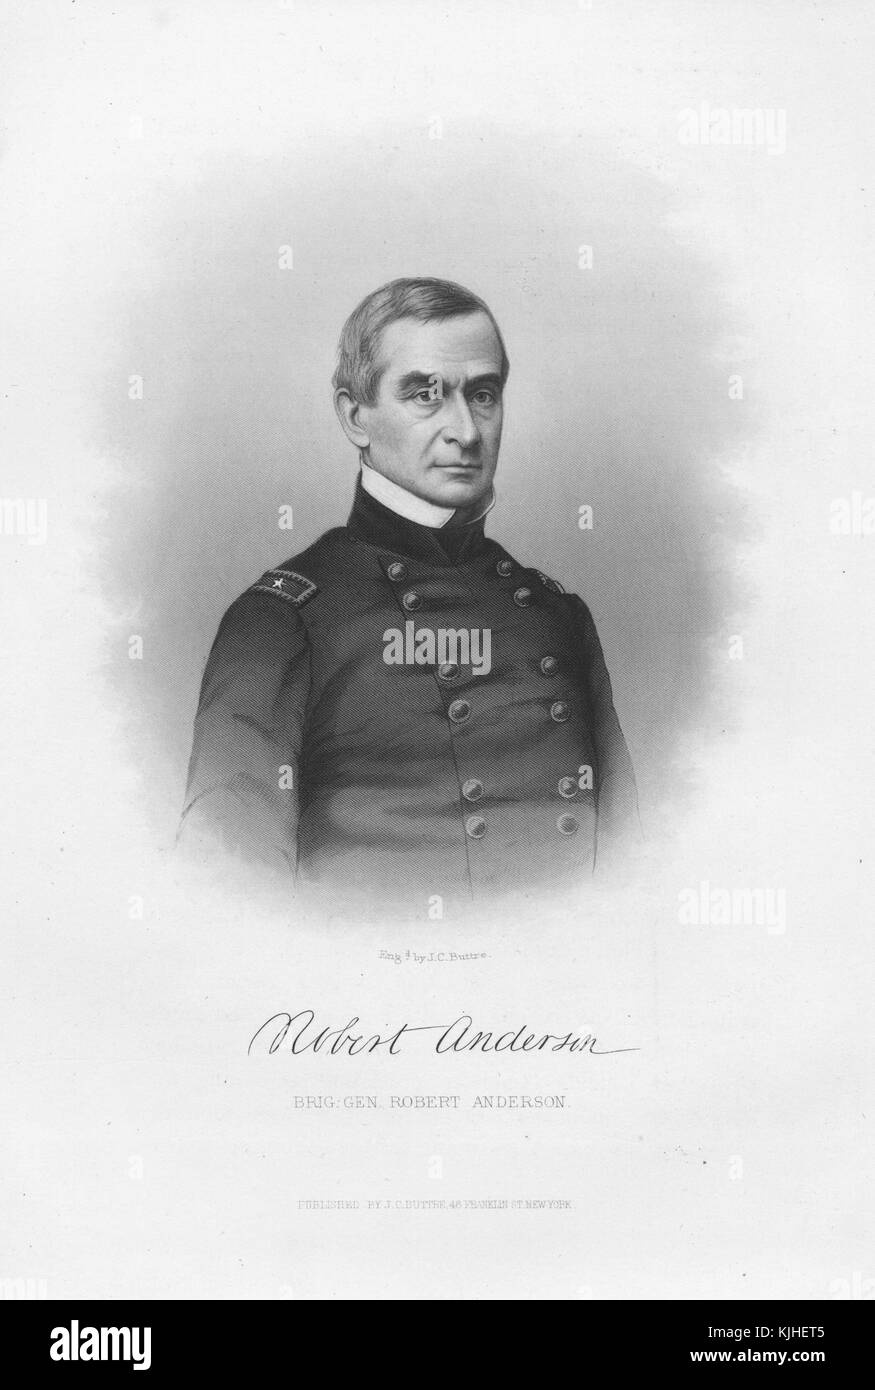 Engraved portrait of Brigadier General Robert Anderson, a United States Army officer during the American Civil War, his actions in defense of Fort Sumter made him an immediate national hero, his signature depicted at the bottom, United States, 1870. From the New York Public Library. Stock Photo